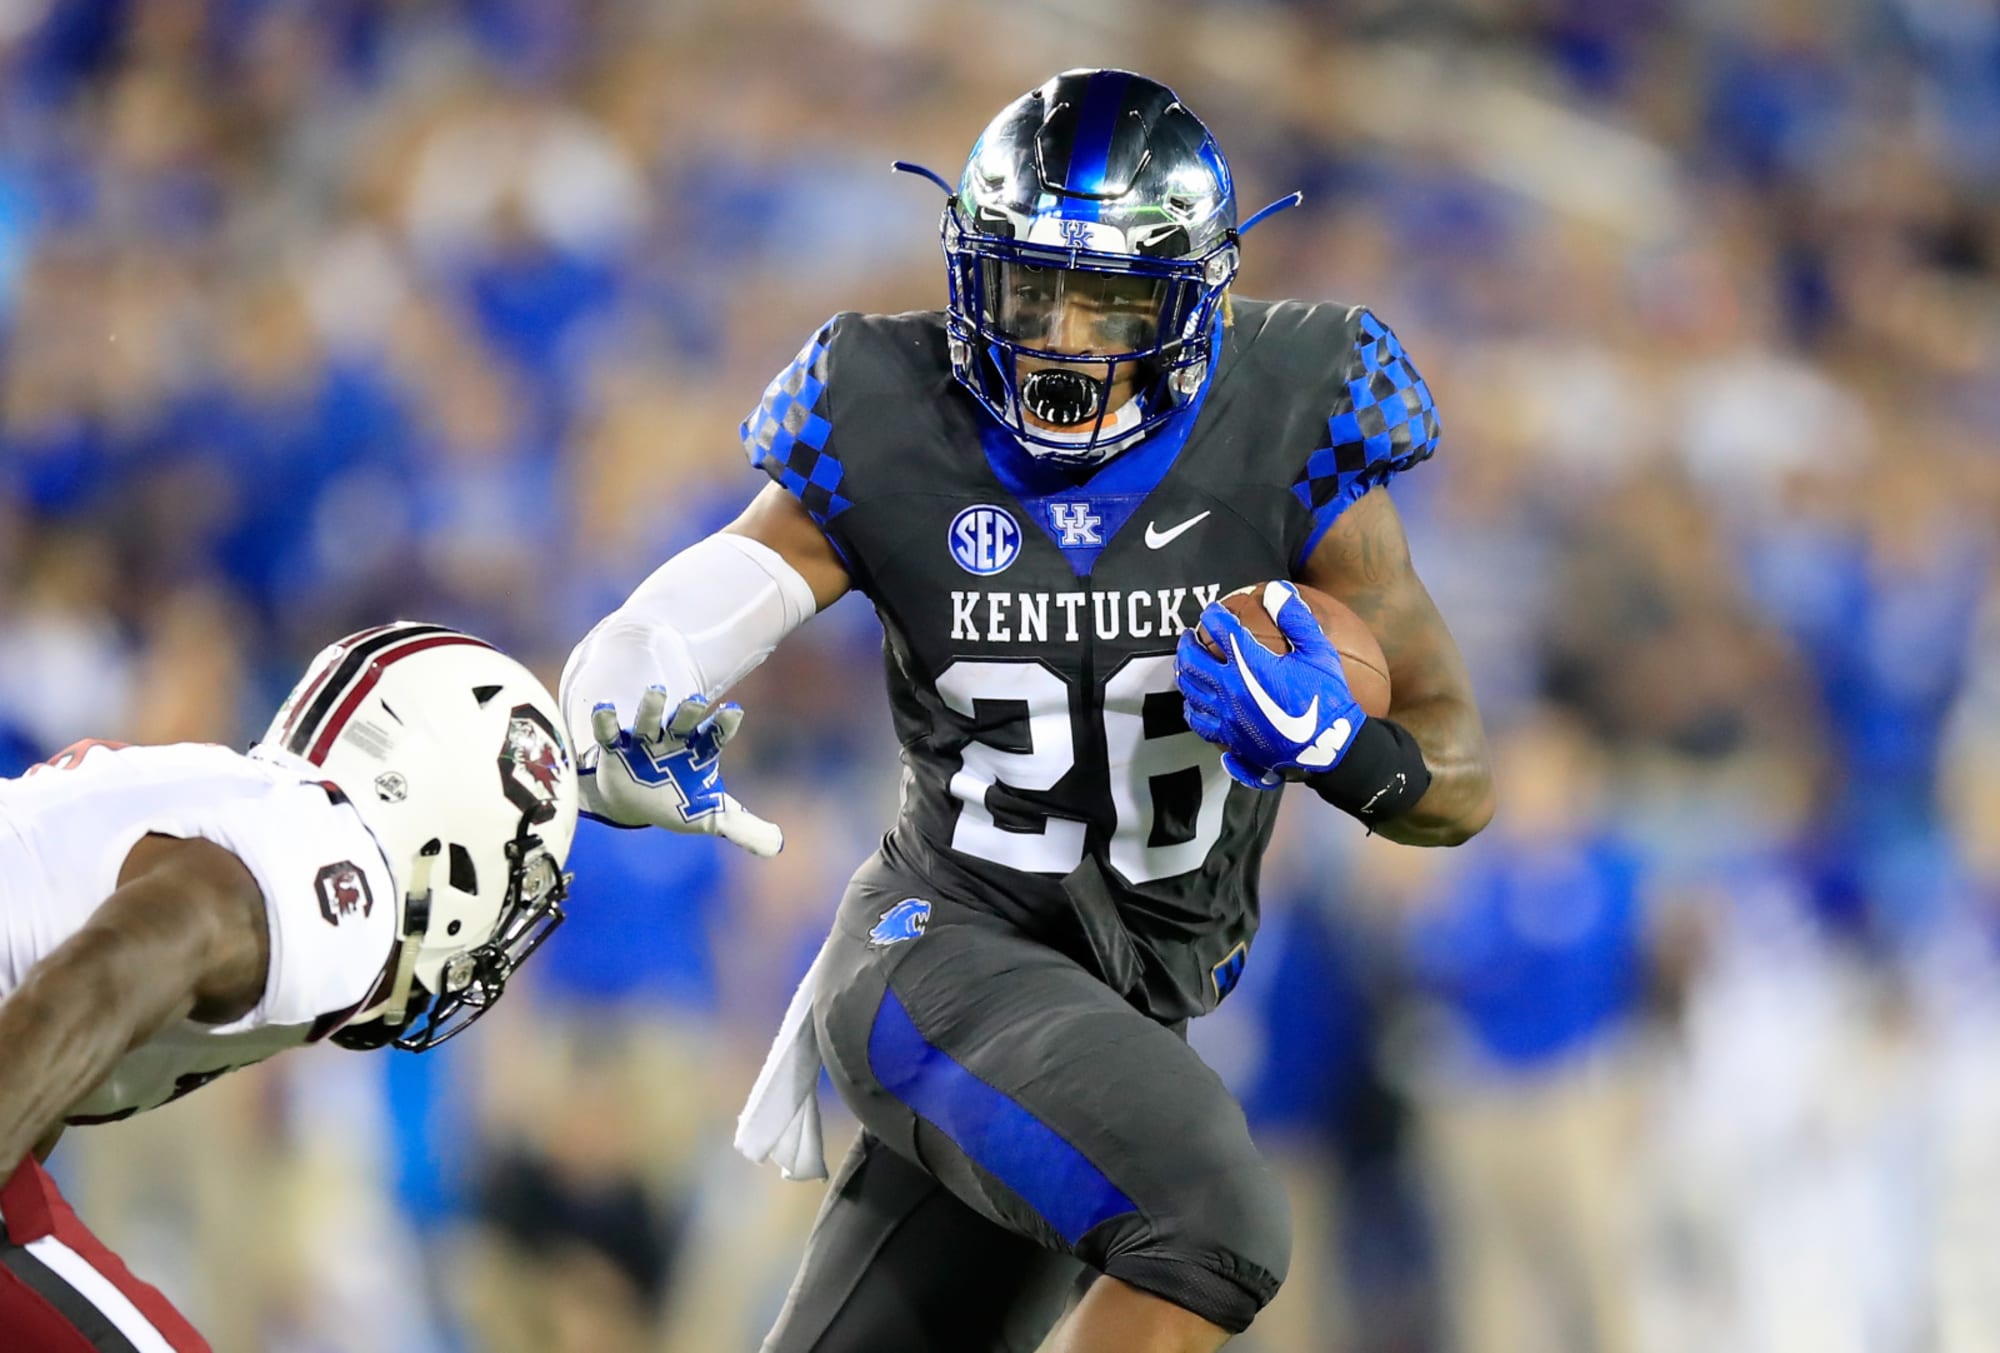 Kentucky Football It's time to buy into the Wildcats